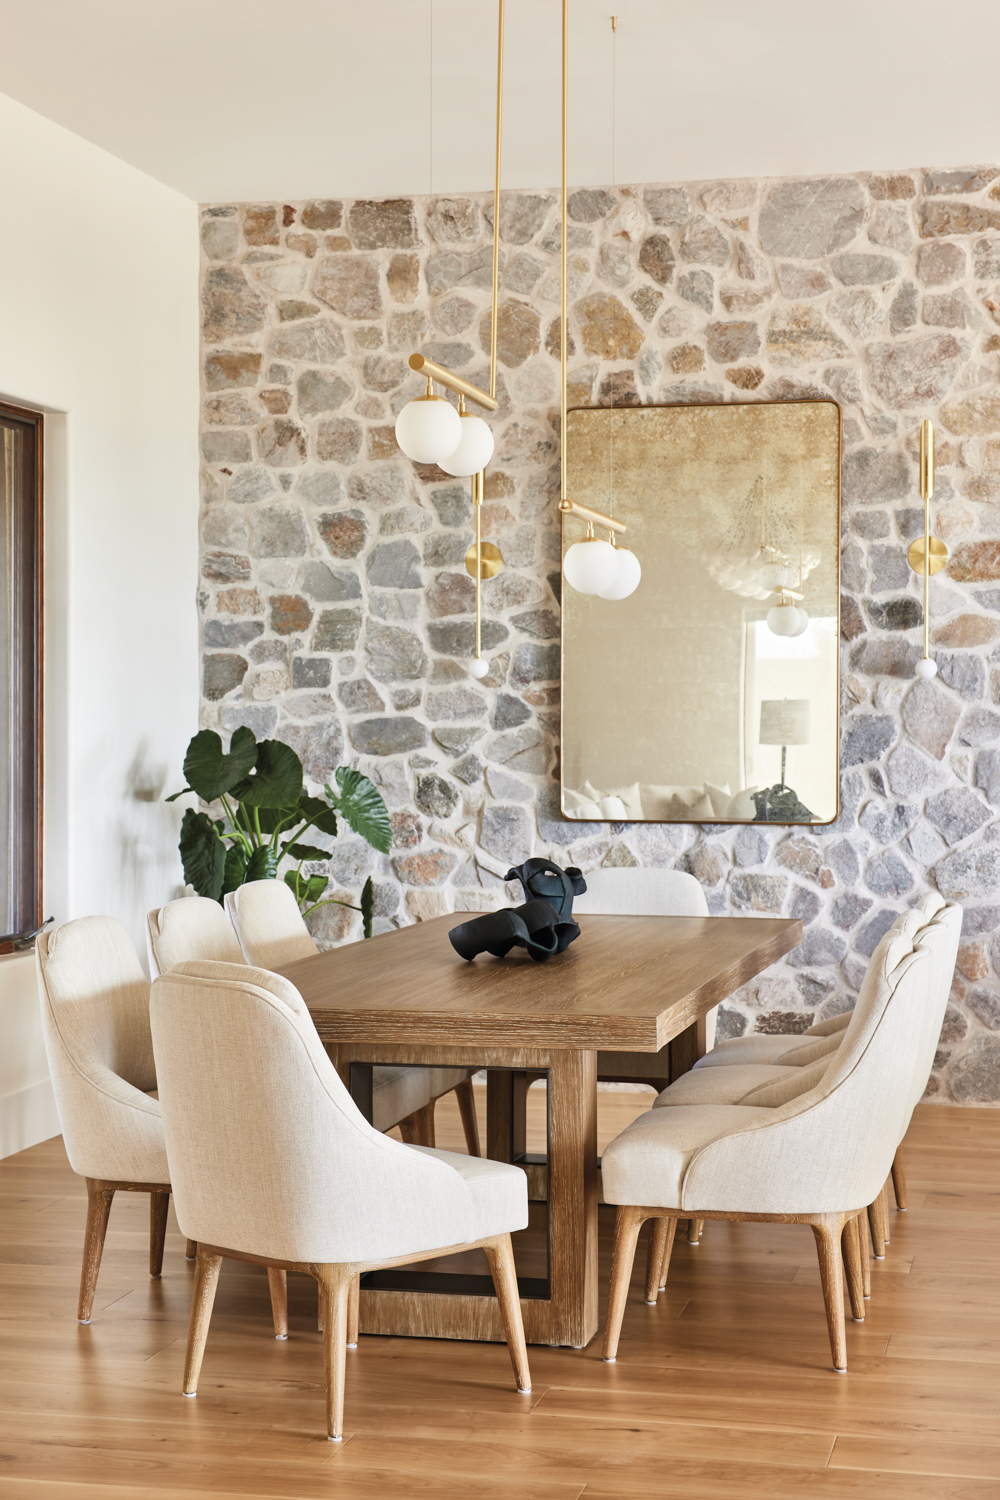 Dining room with cream-colored upholstered chairs around a wood table in front of a stone wall by Eva Higby